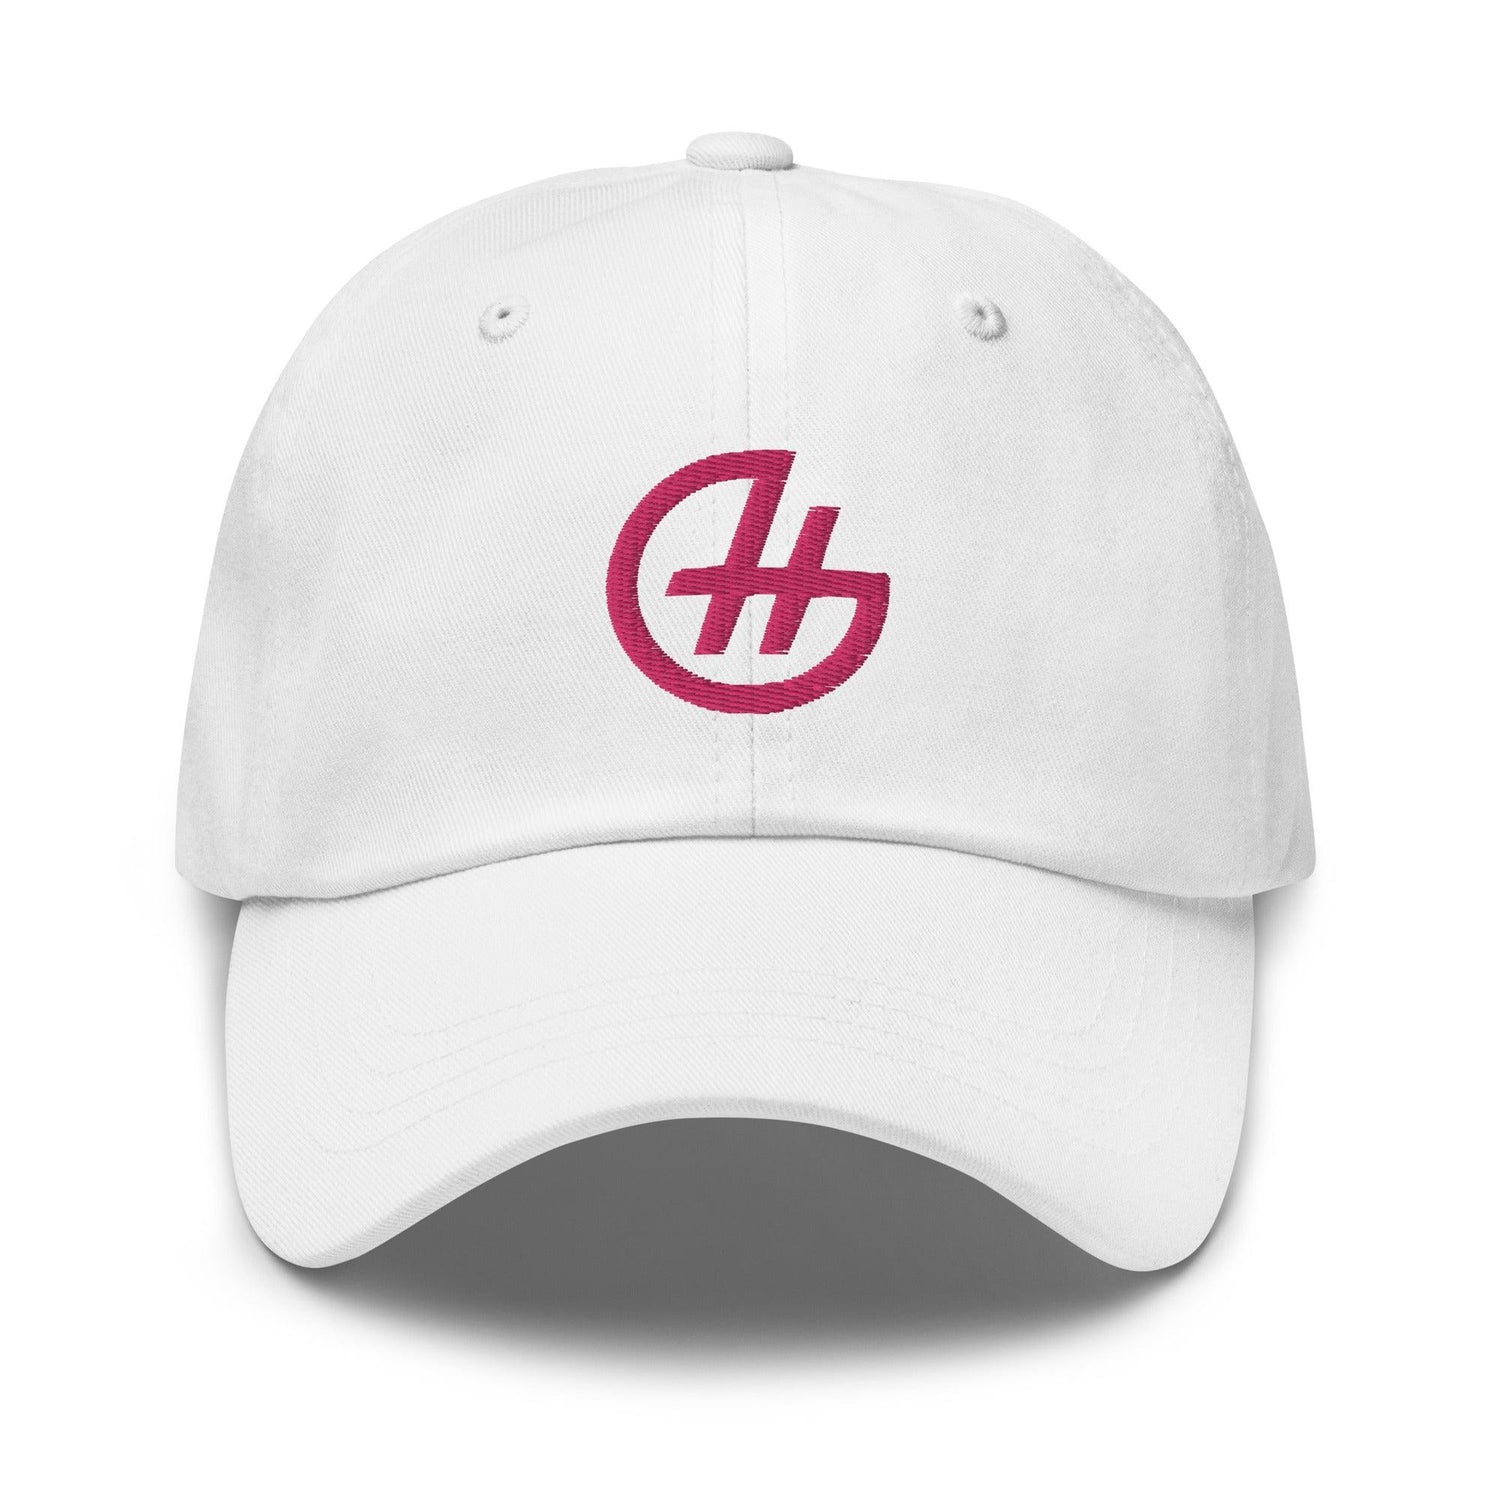 Hannah Gusters "The Brand" hat - Fan Arch